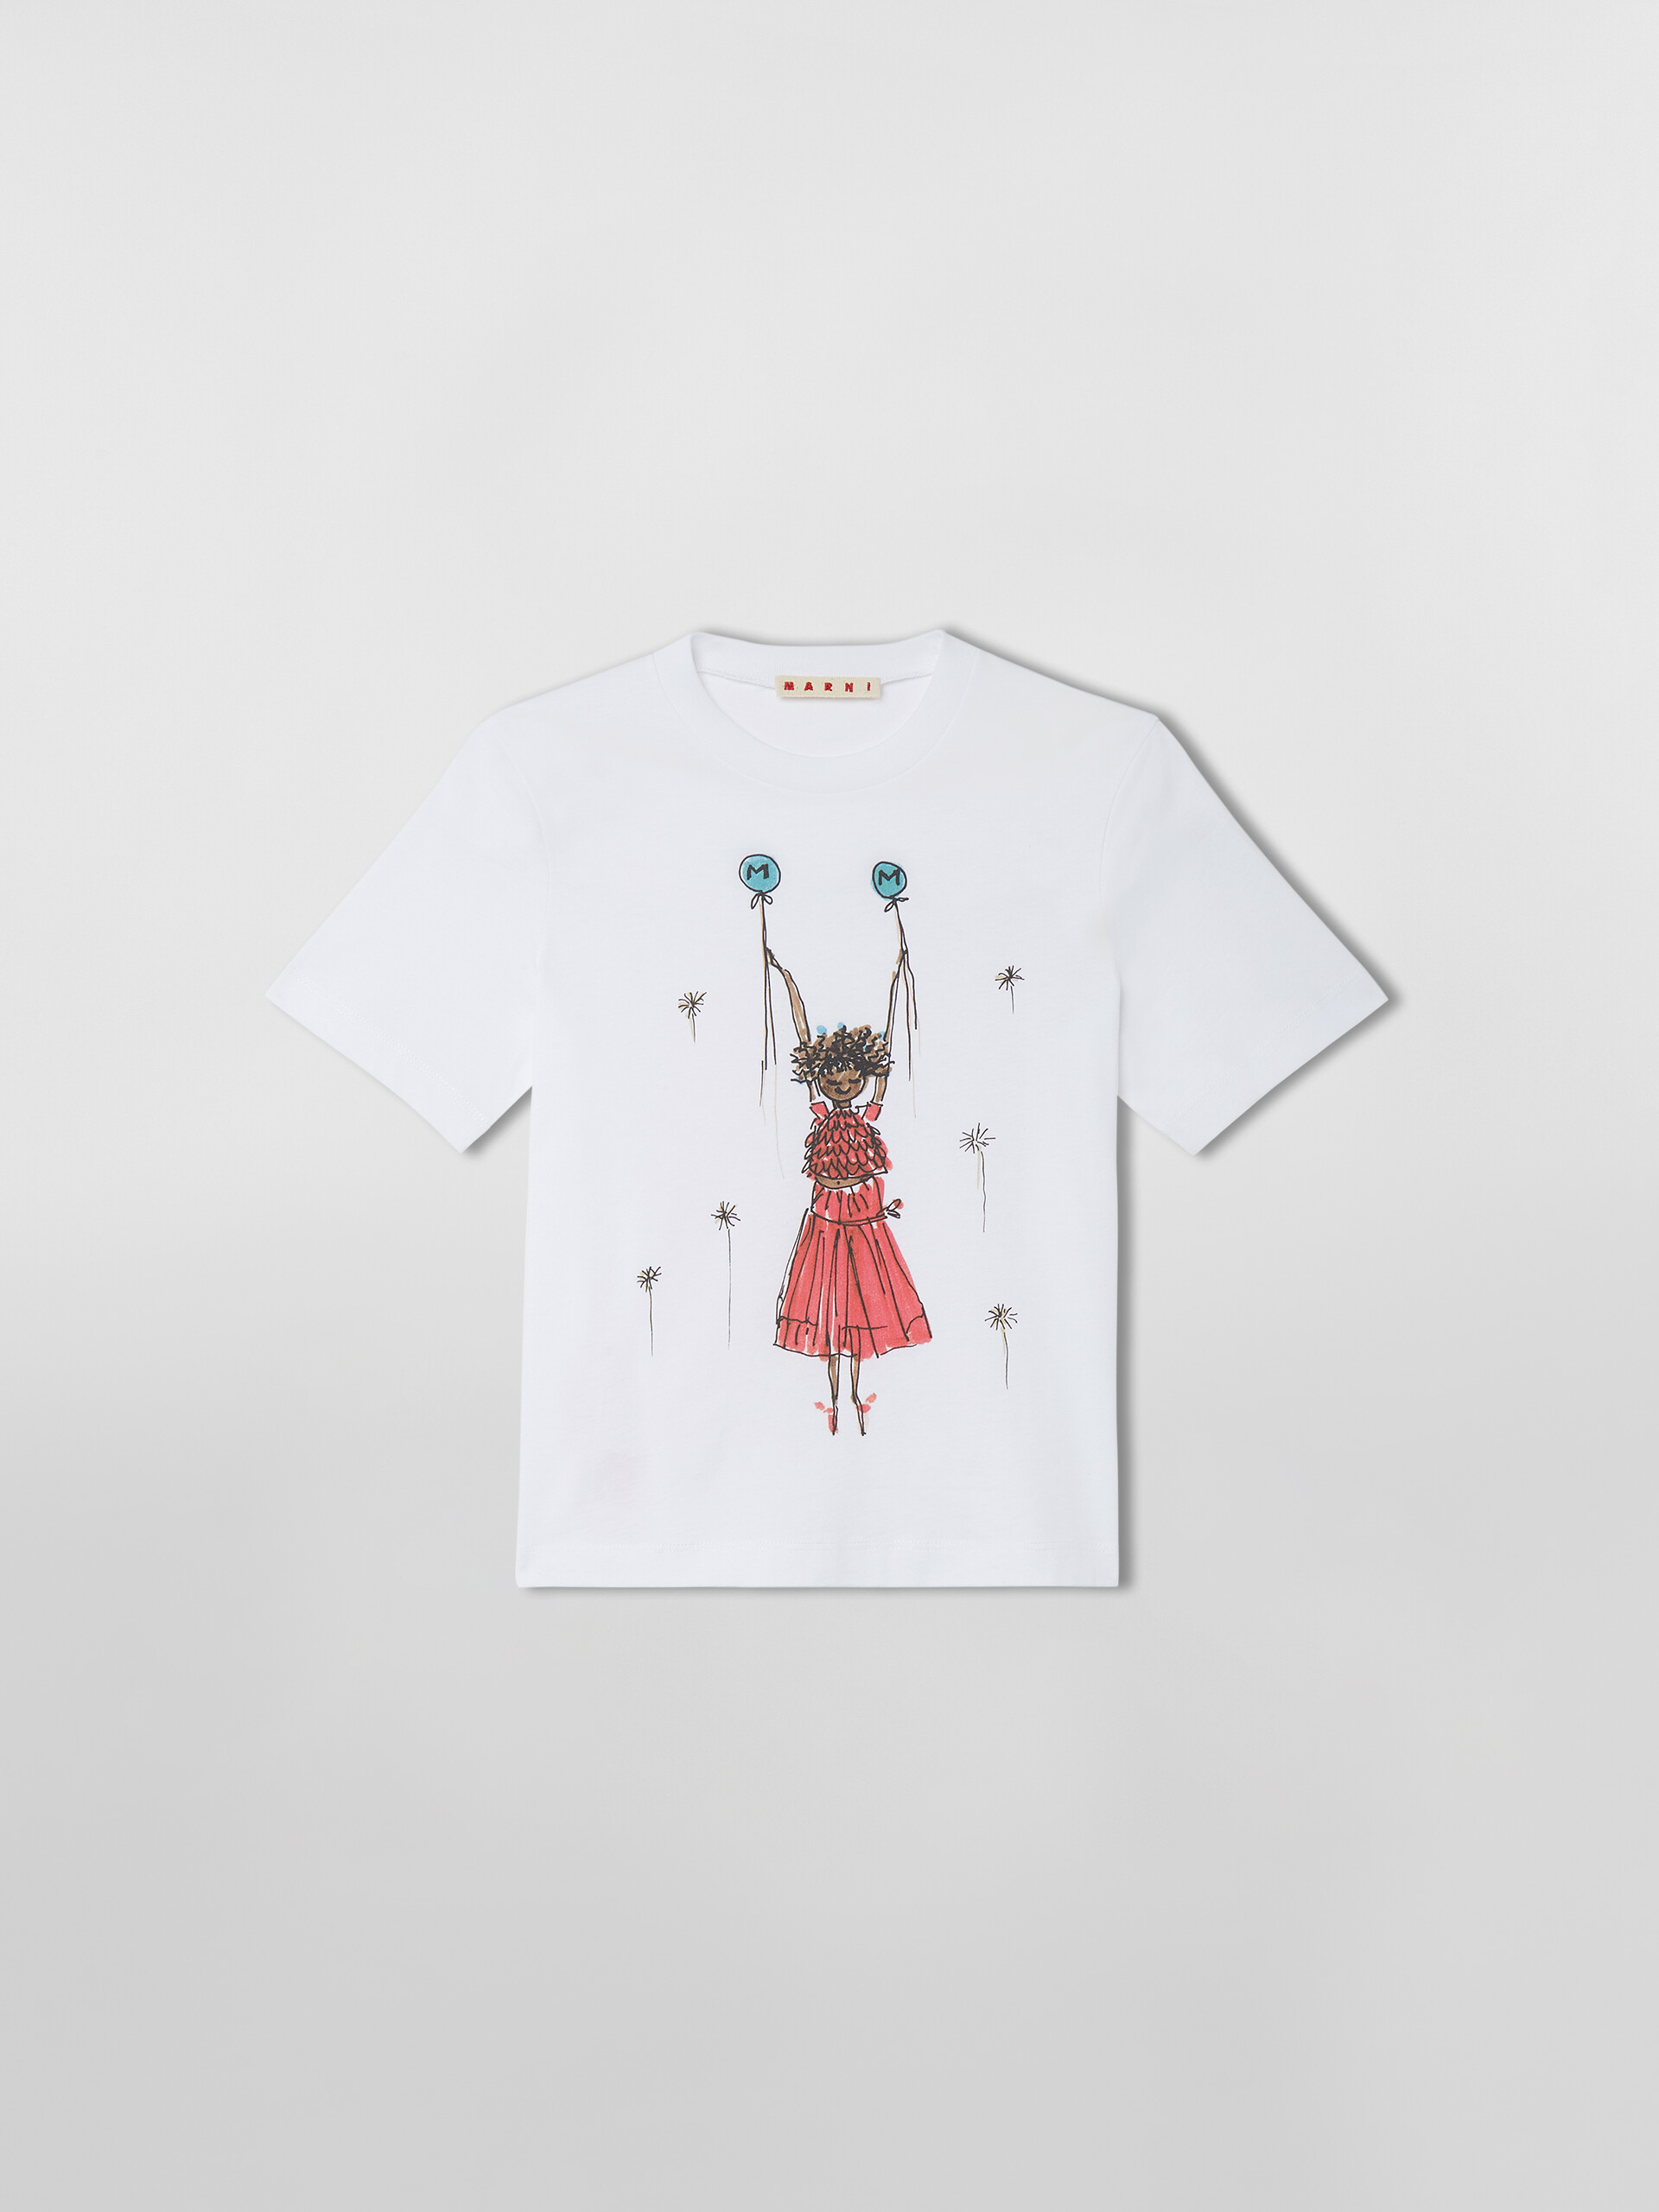 T-SHIRT WITH PRINT - T-shirts - Image 1